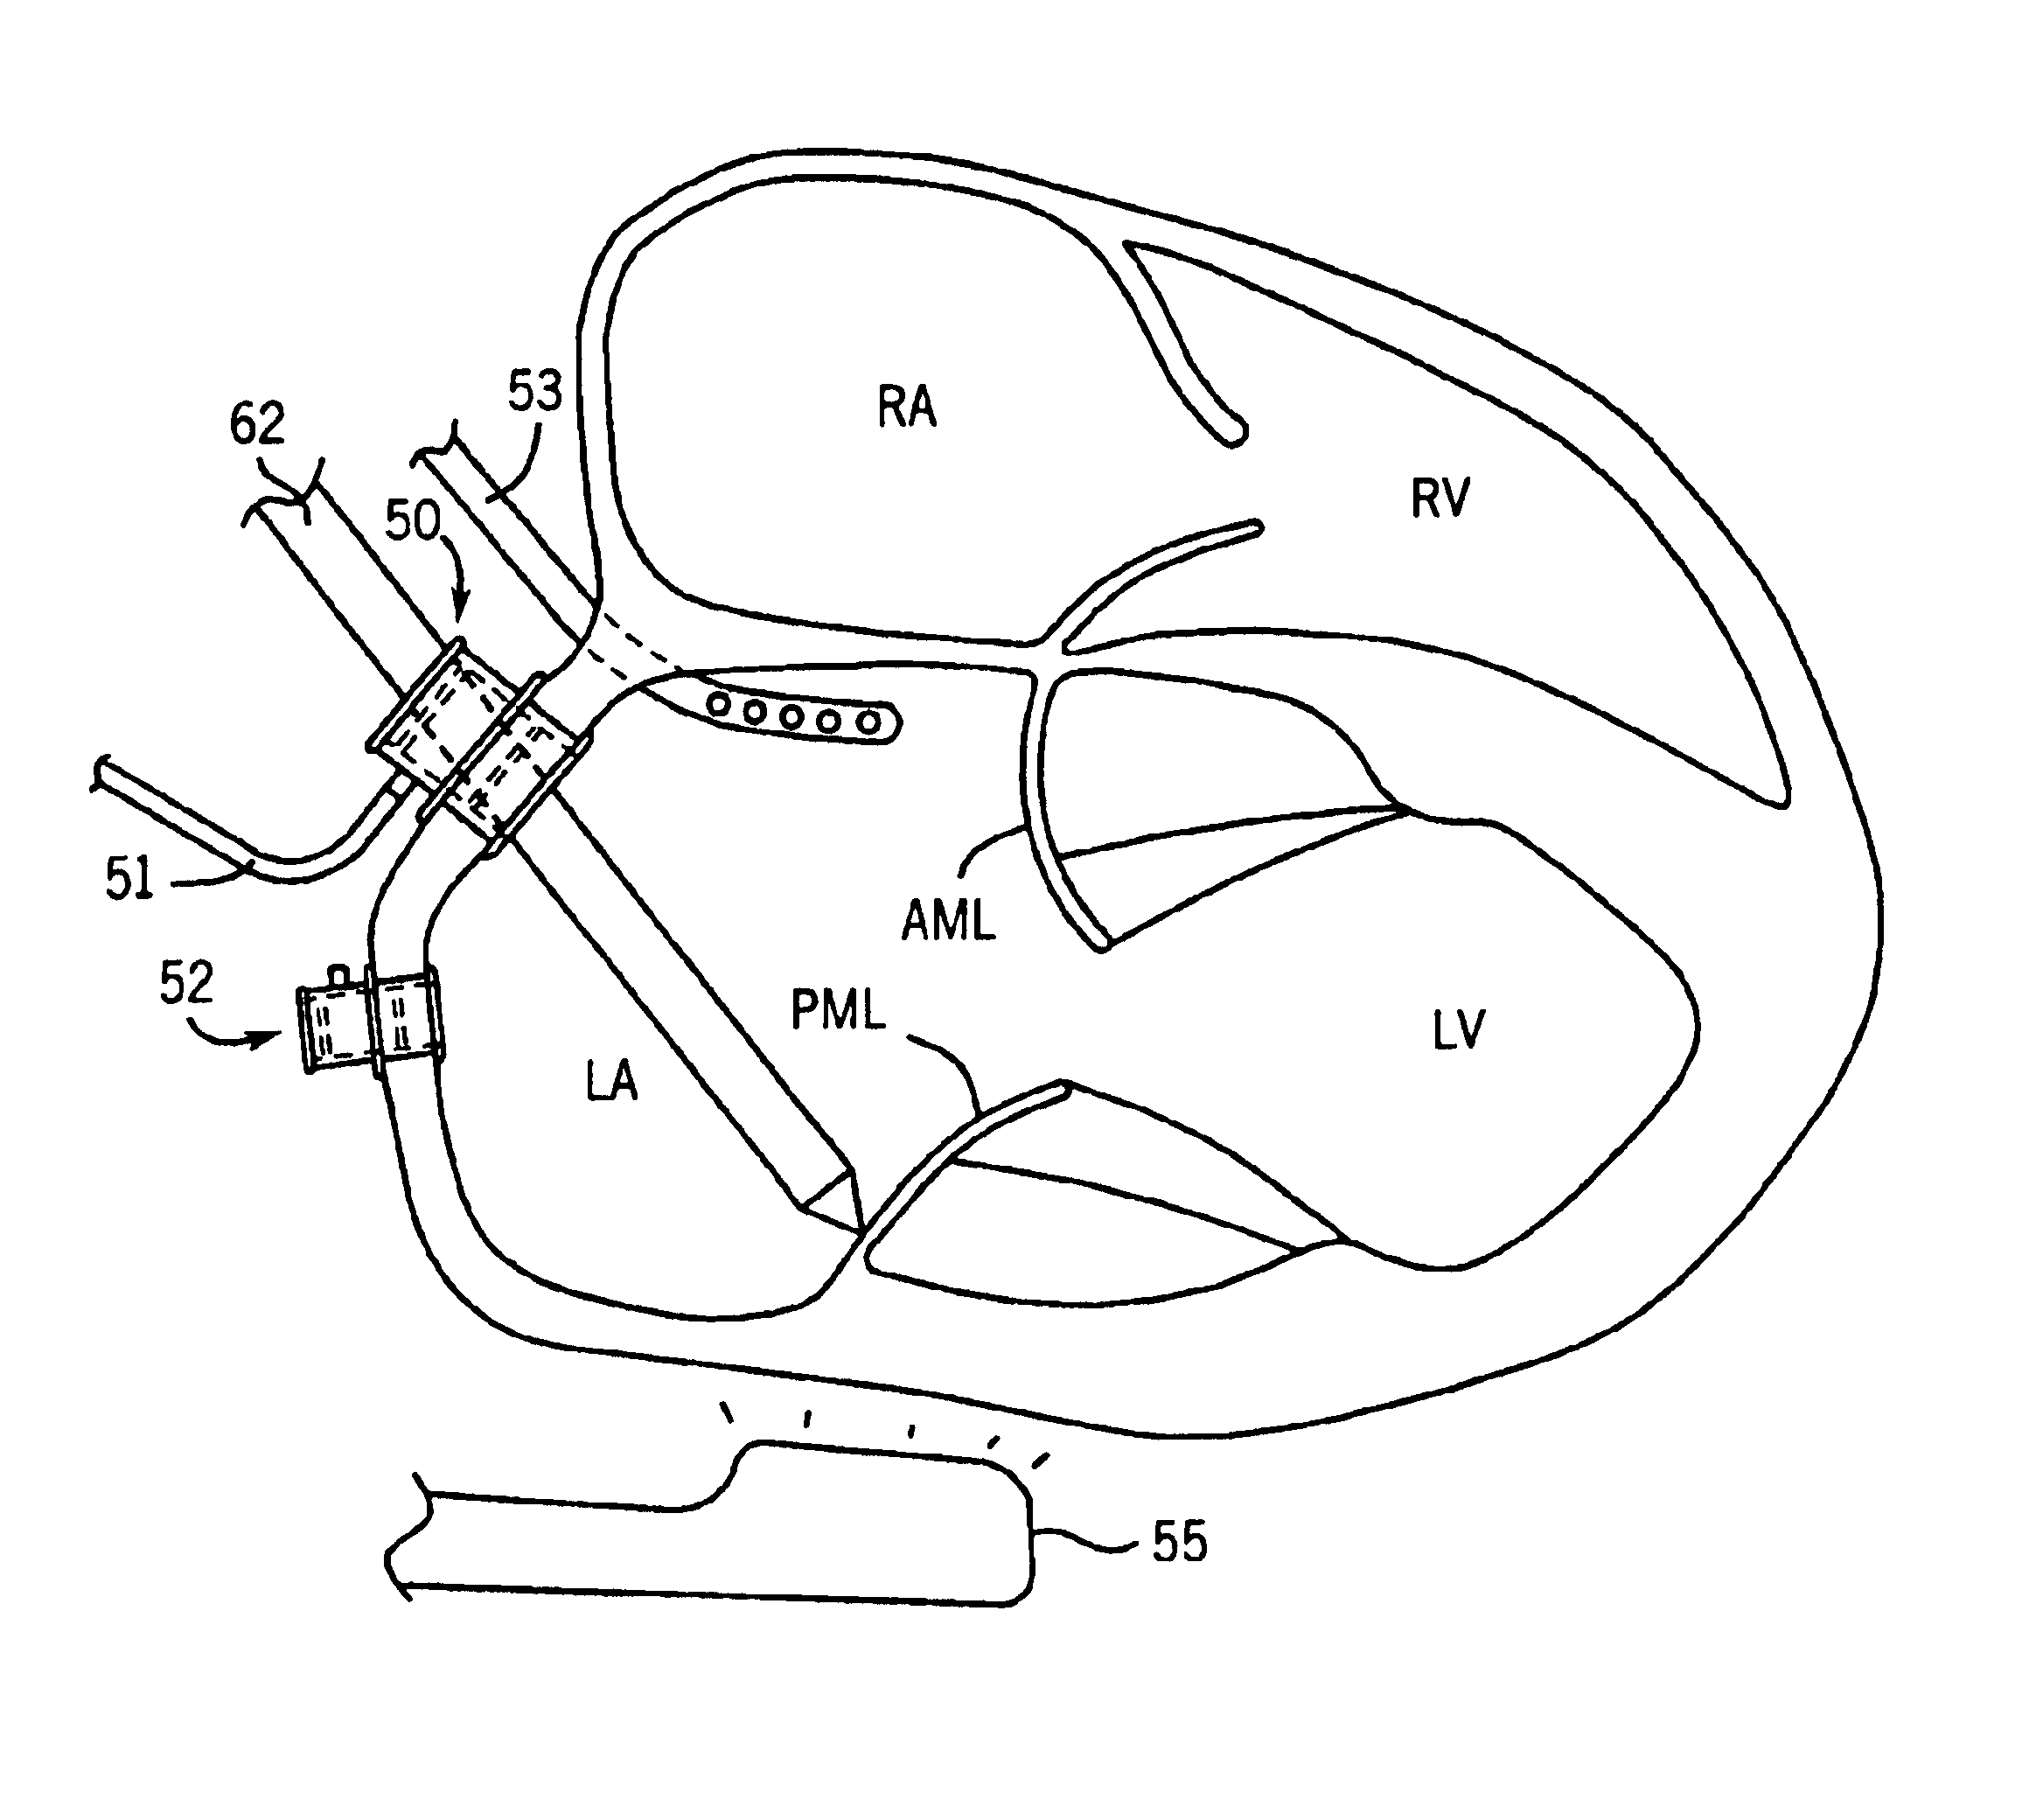 Apparatuses and methods for performing minimally invasive diagnostic and surgical procedures inside of a beating heart